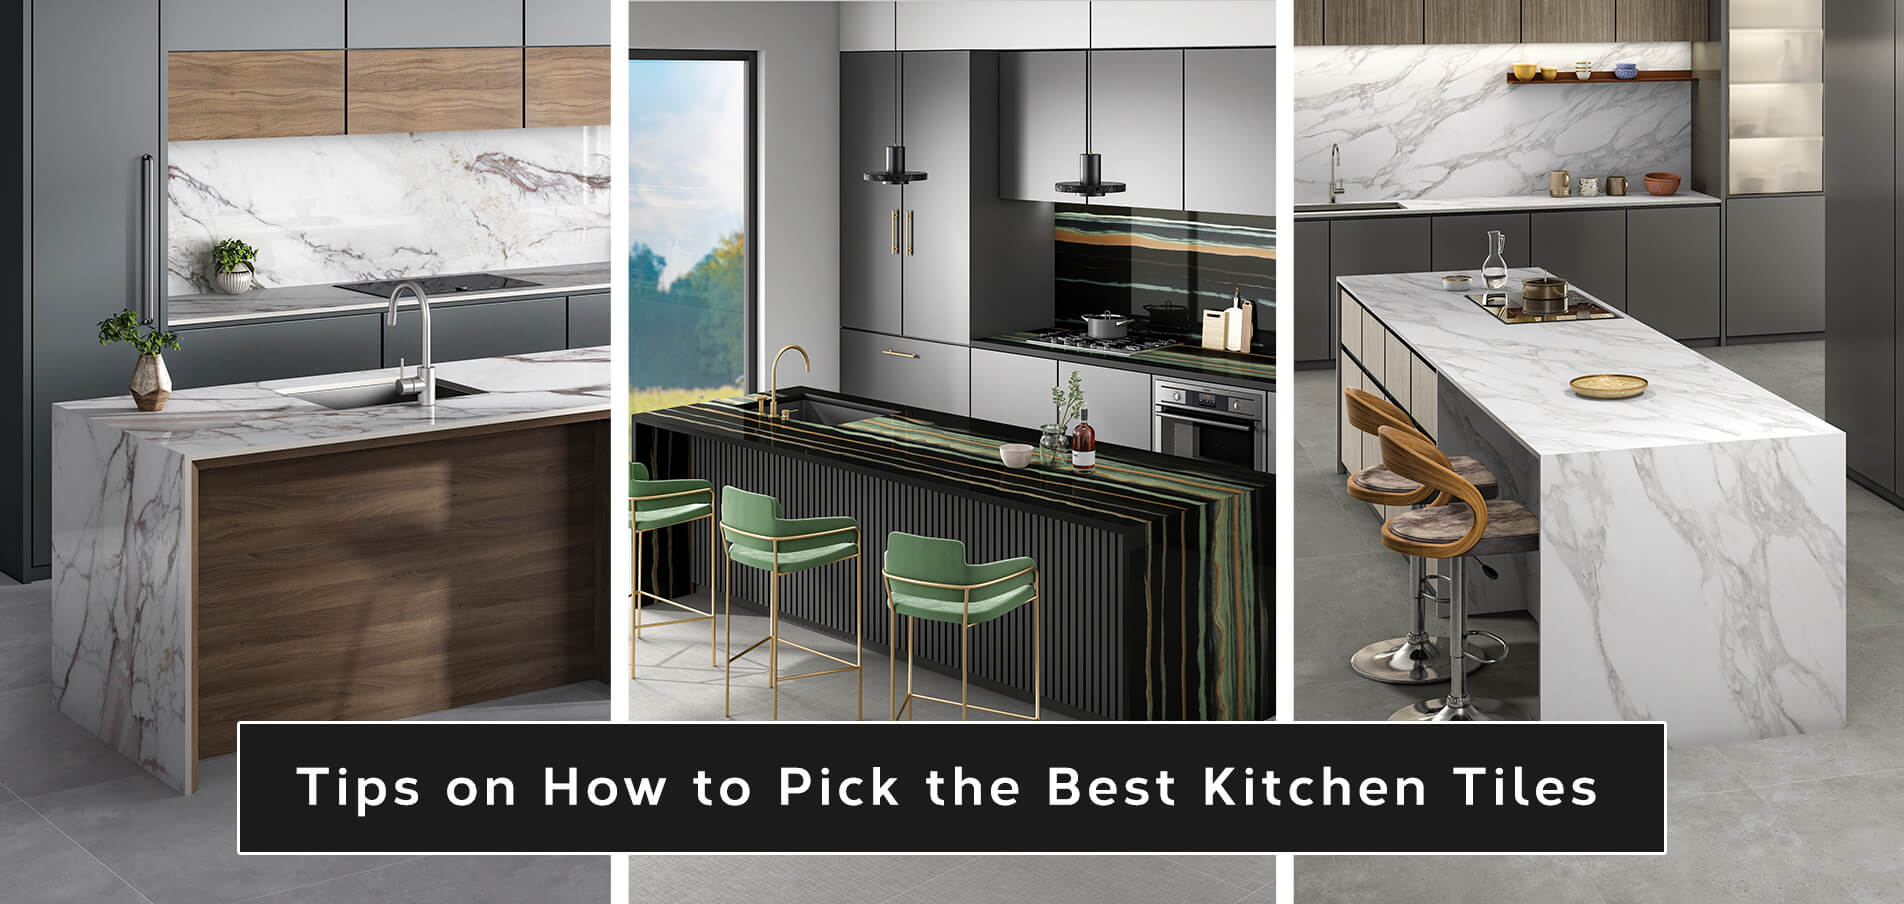 Tips on Picking the Best Kitchen Tiles by Simpolo